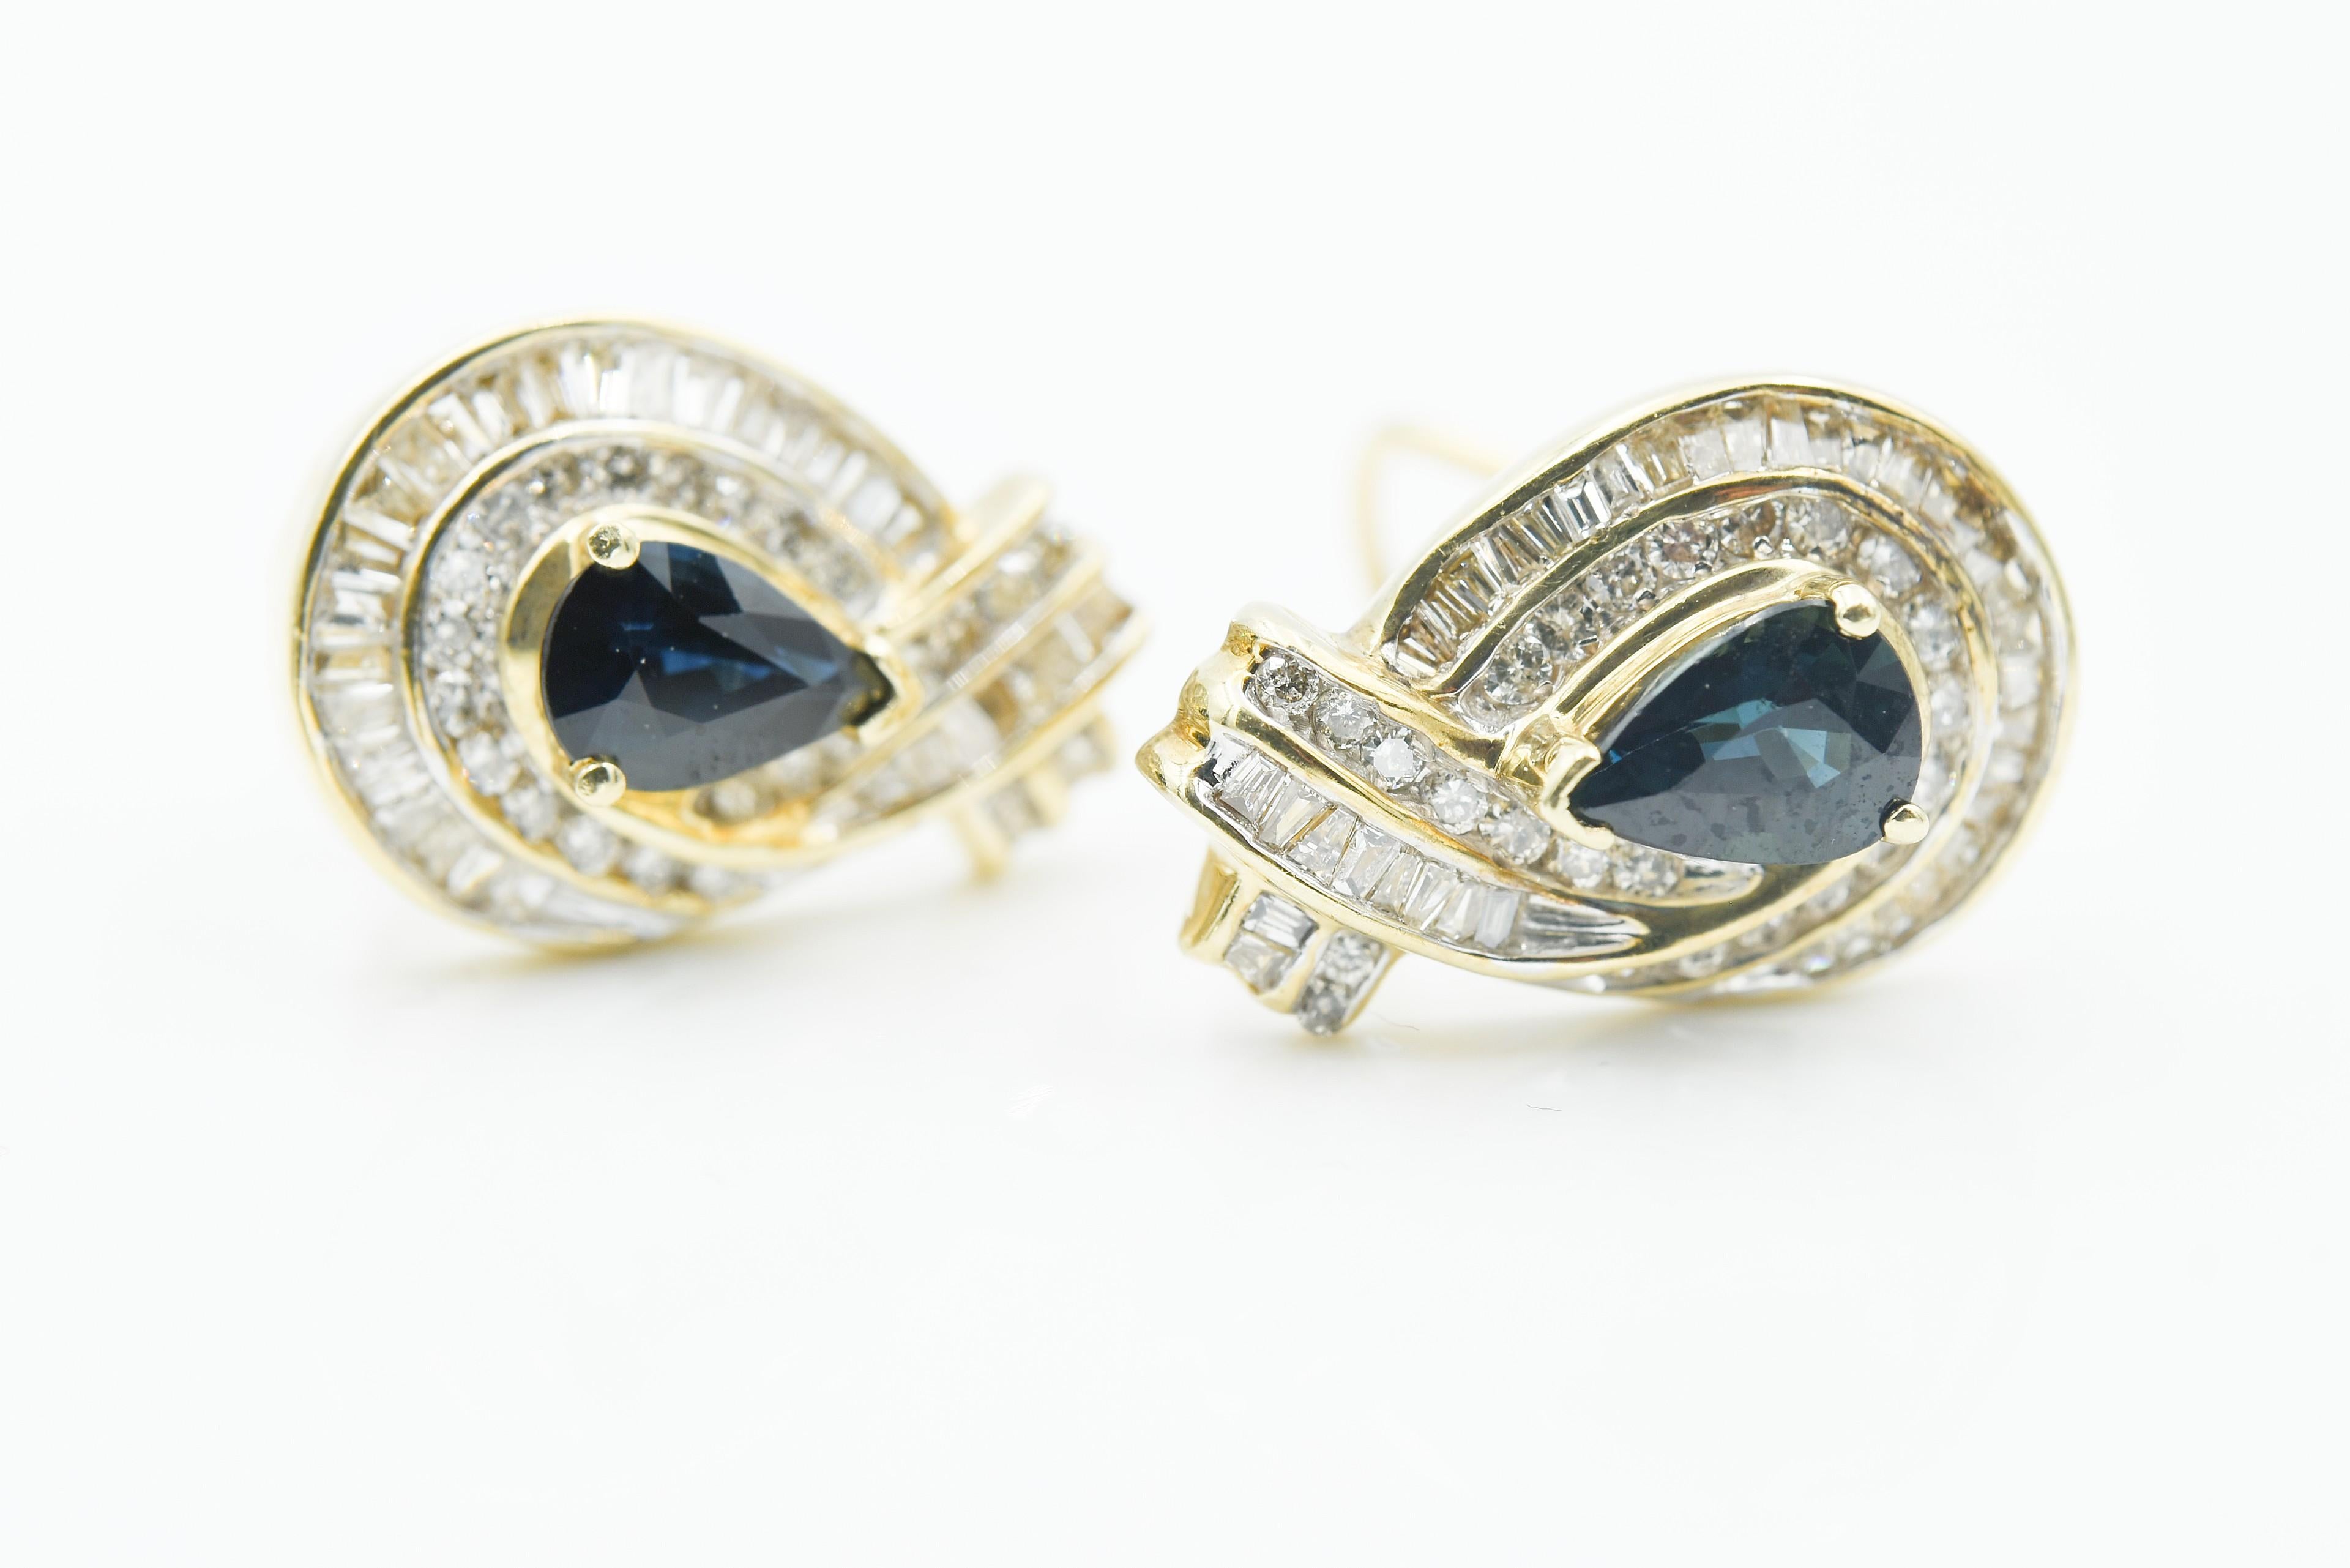 Diamond Baguette and Blue Sapphire Earrings with one carat pear shape Sapphire center stones. Round and Baggett channel set diamonds. 14K yellow gold with omega backs. 6.2 grams 14k gold. Diamond weight 2.2ct total.  Sapphires are medium to dark